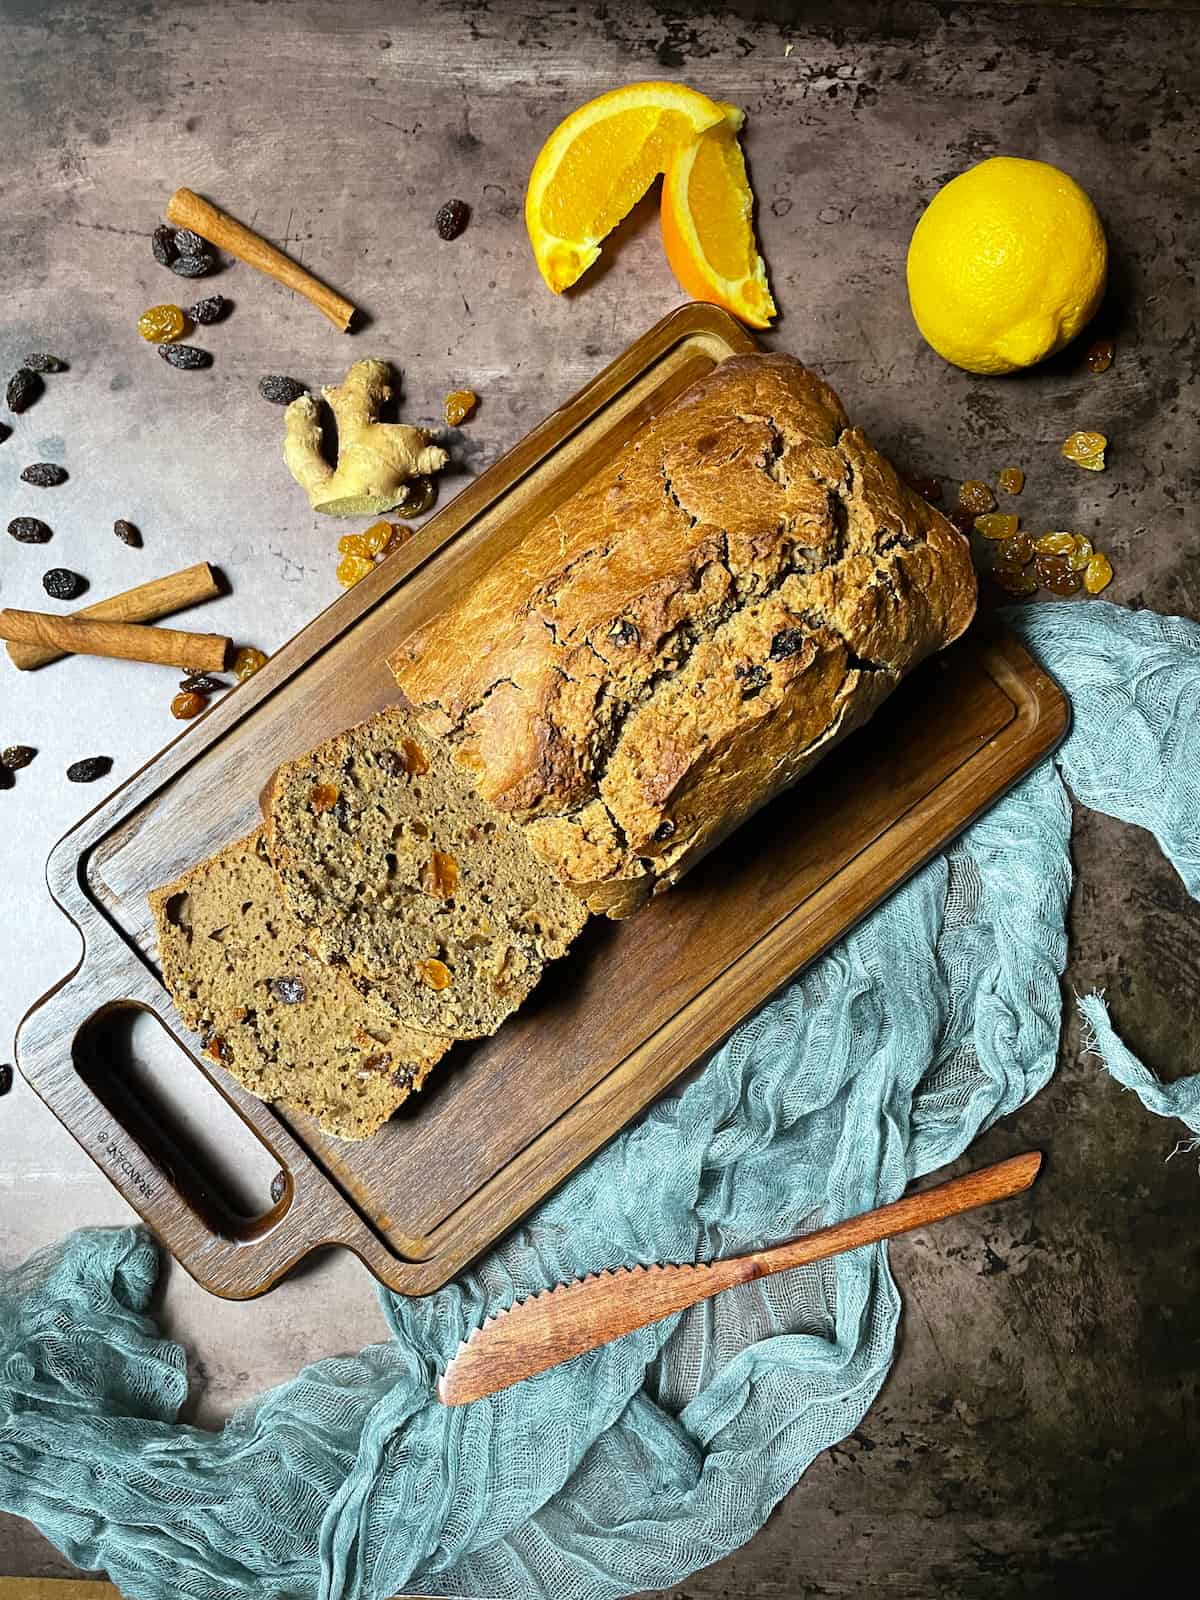 Dried fruit bread on a wood cutting board with a blue cloth, cinnamon, ginger, and raisins.